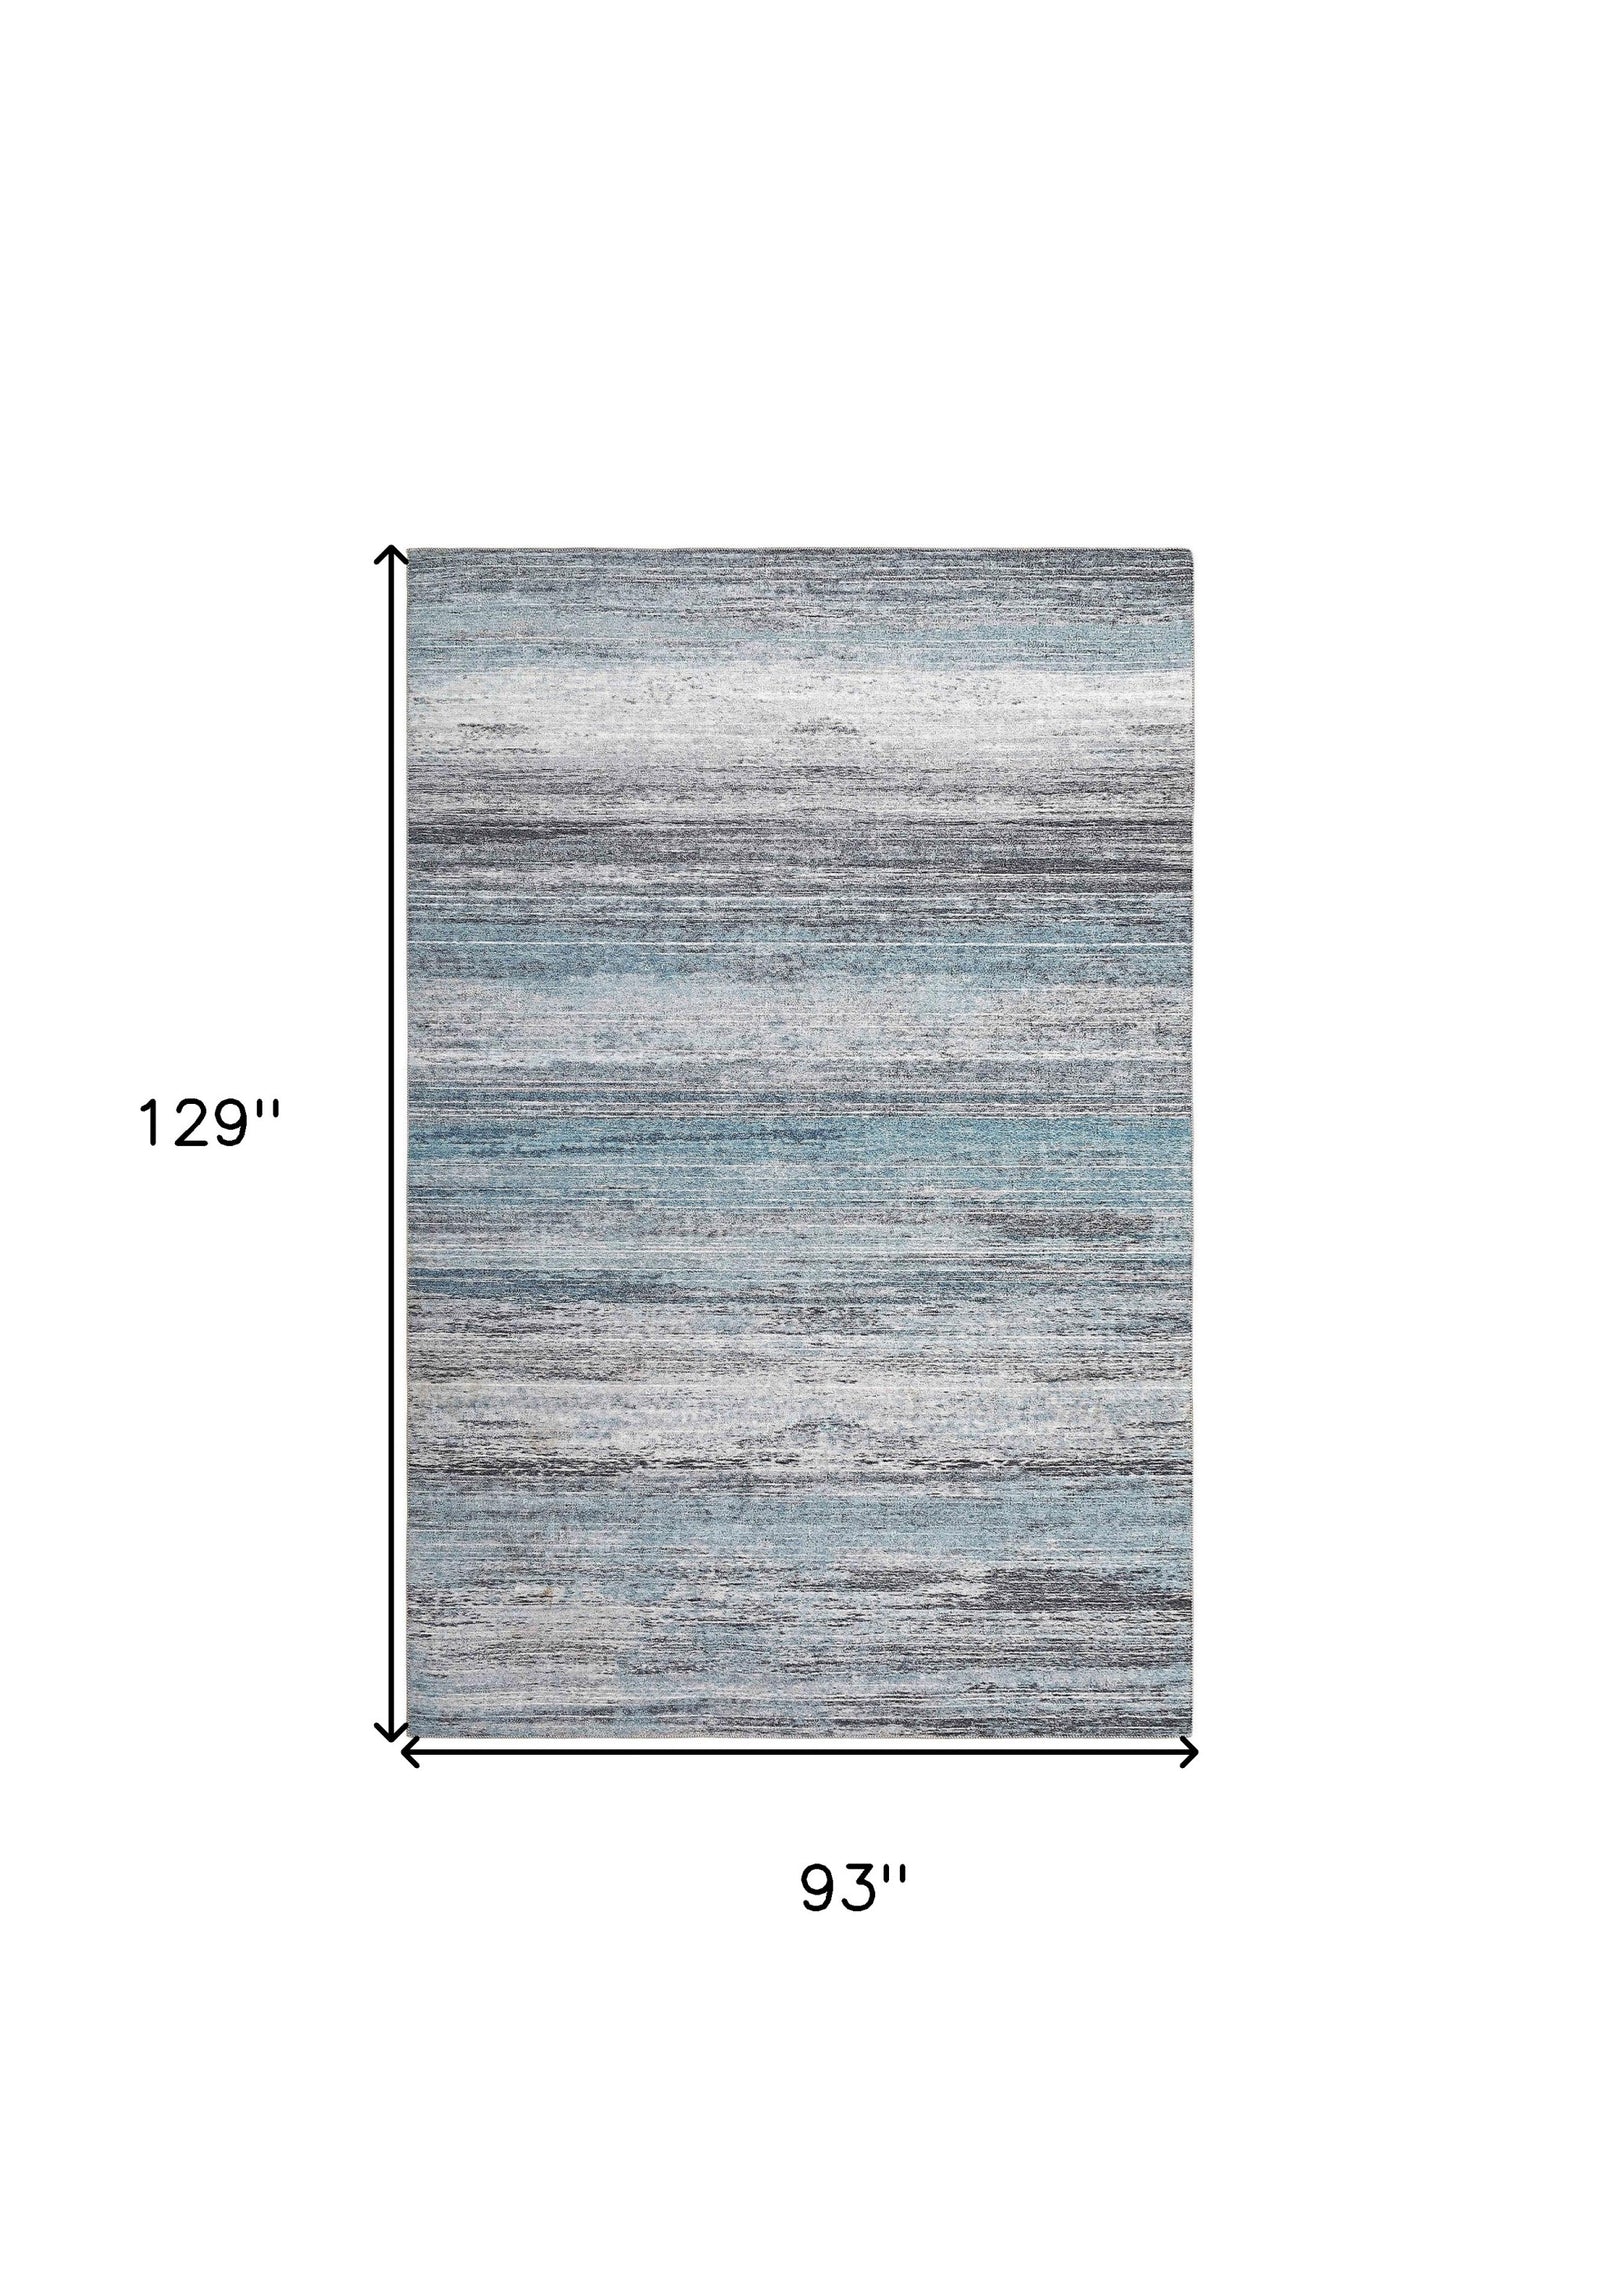 8' X 11' Turquoise and Gray Abstract Stain Resistant Area Rug